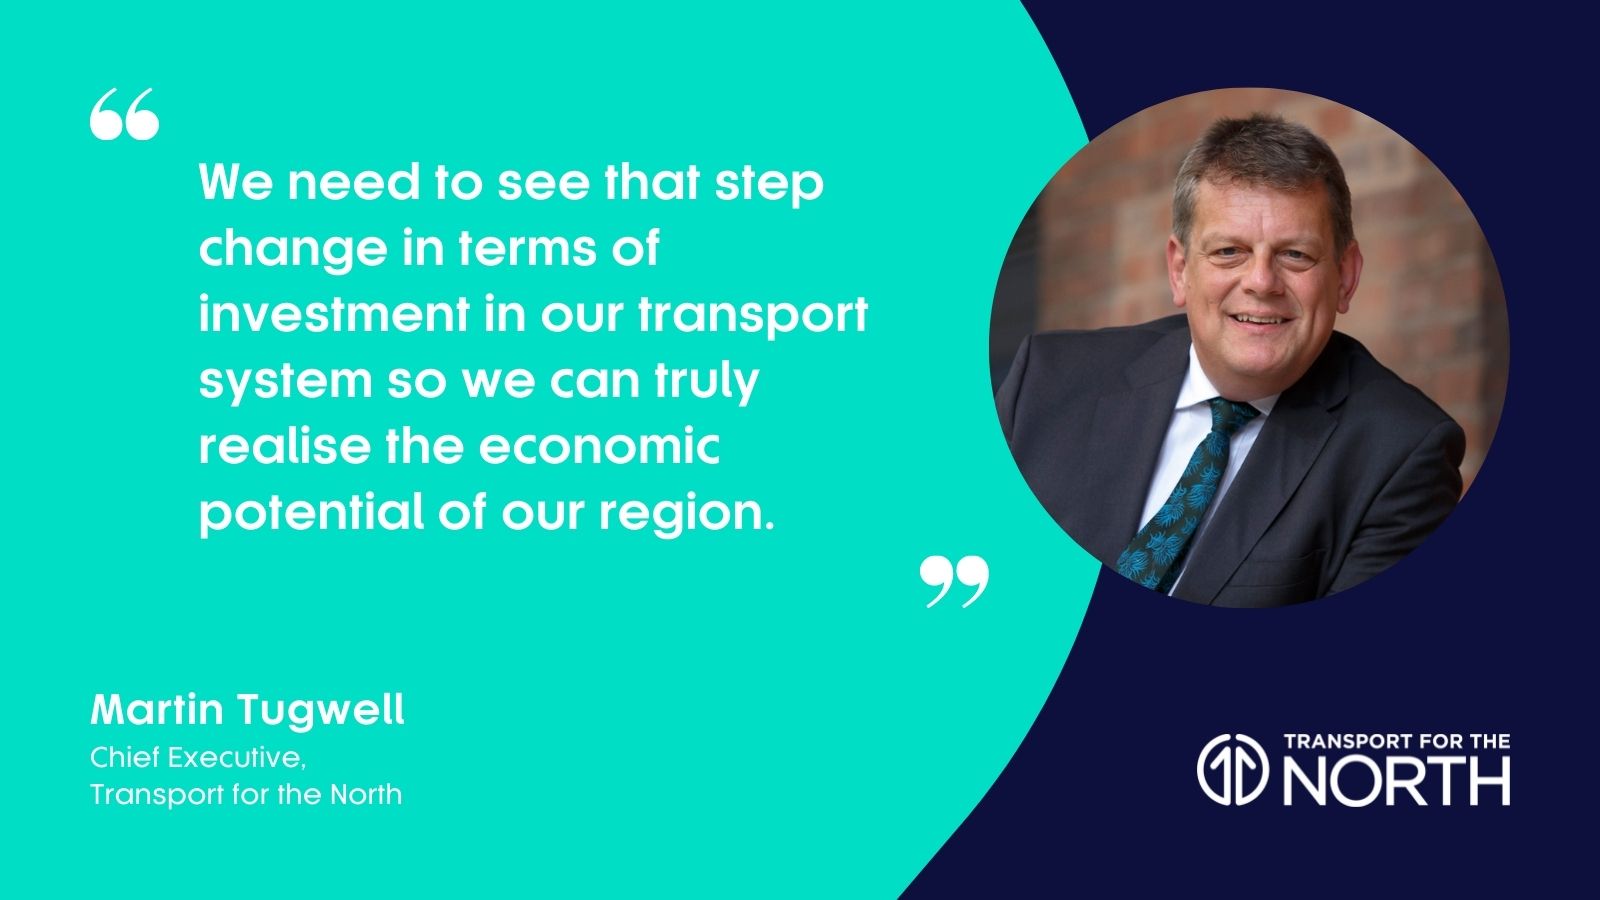 Martin Tugwell comments on transport investment in Cumbria